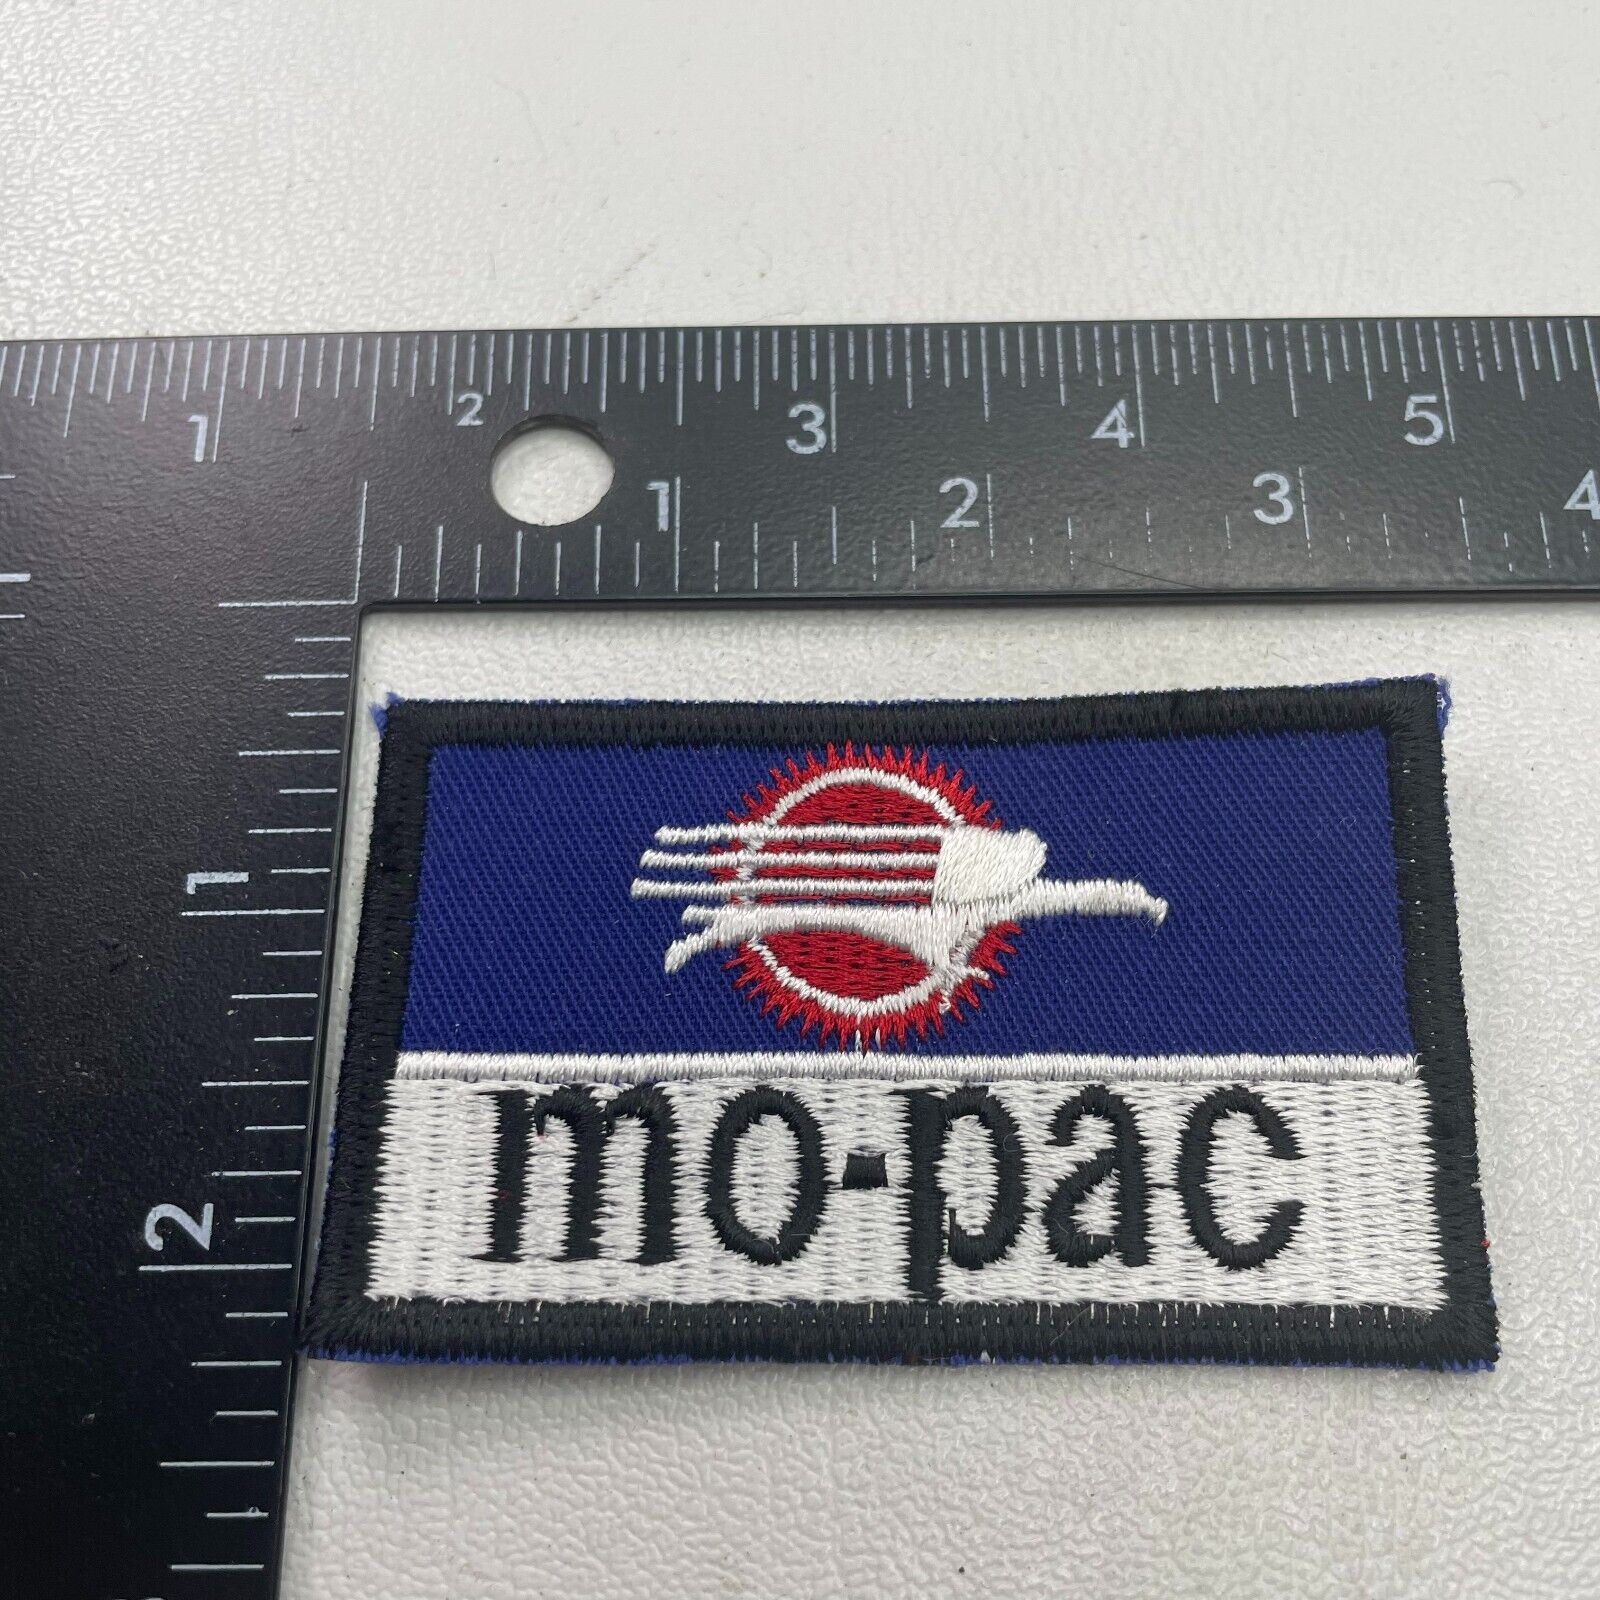 MISSOURI PACIFIC MO-PAC Patch (Railroad / Train Related) 39SD